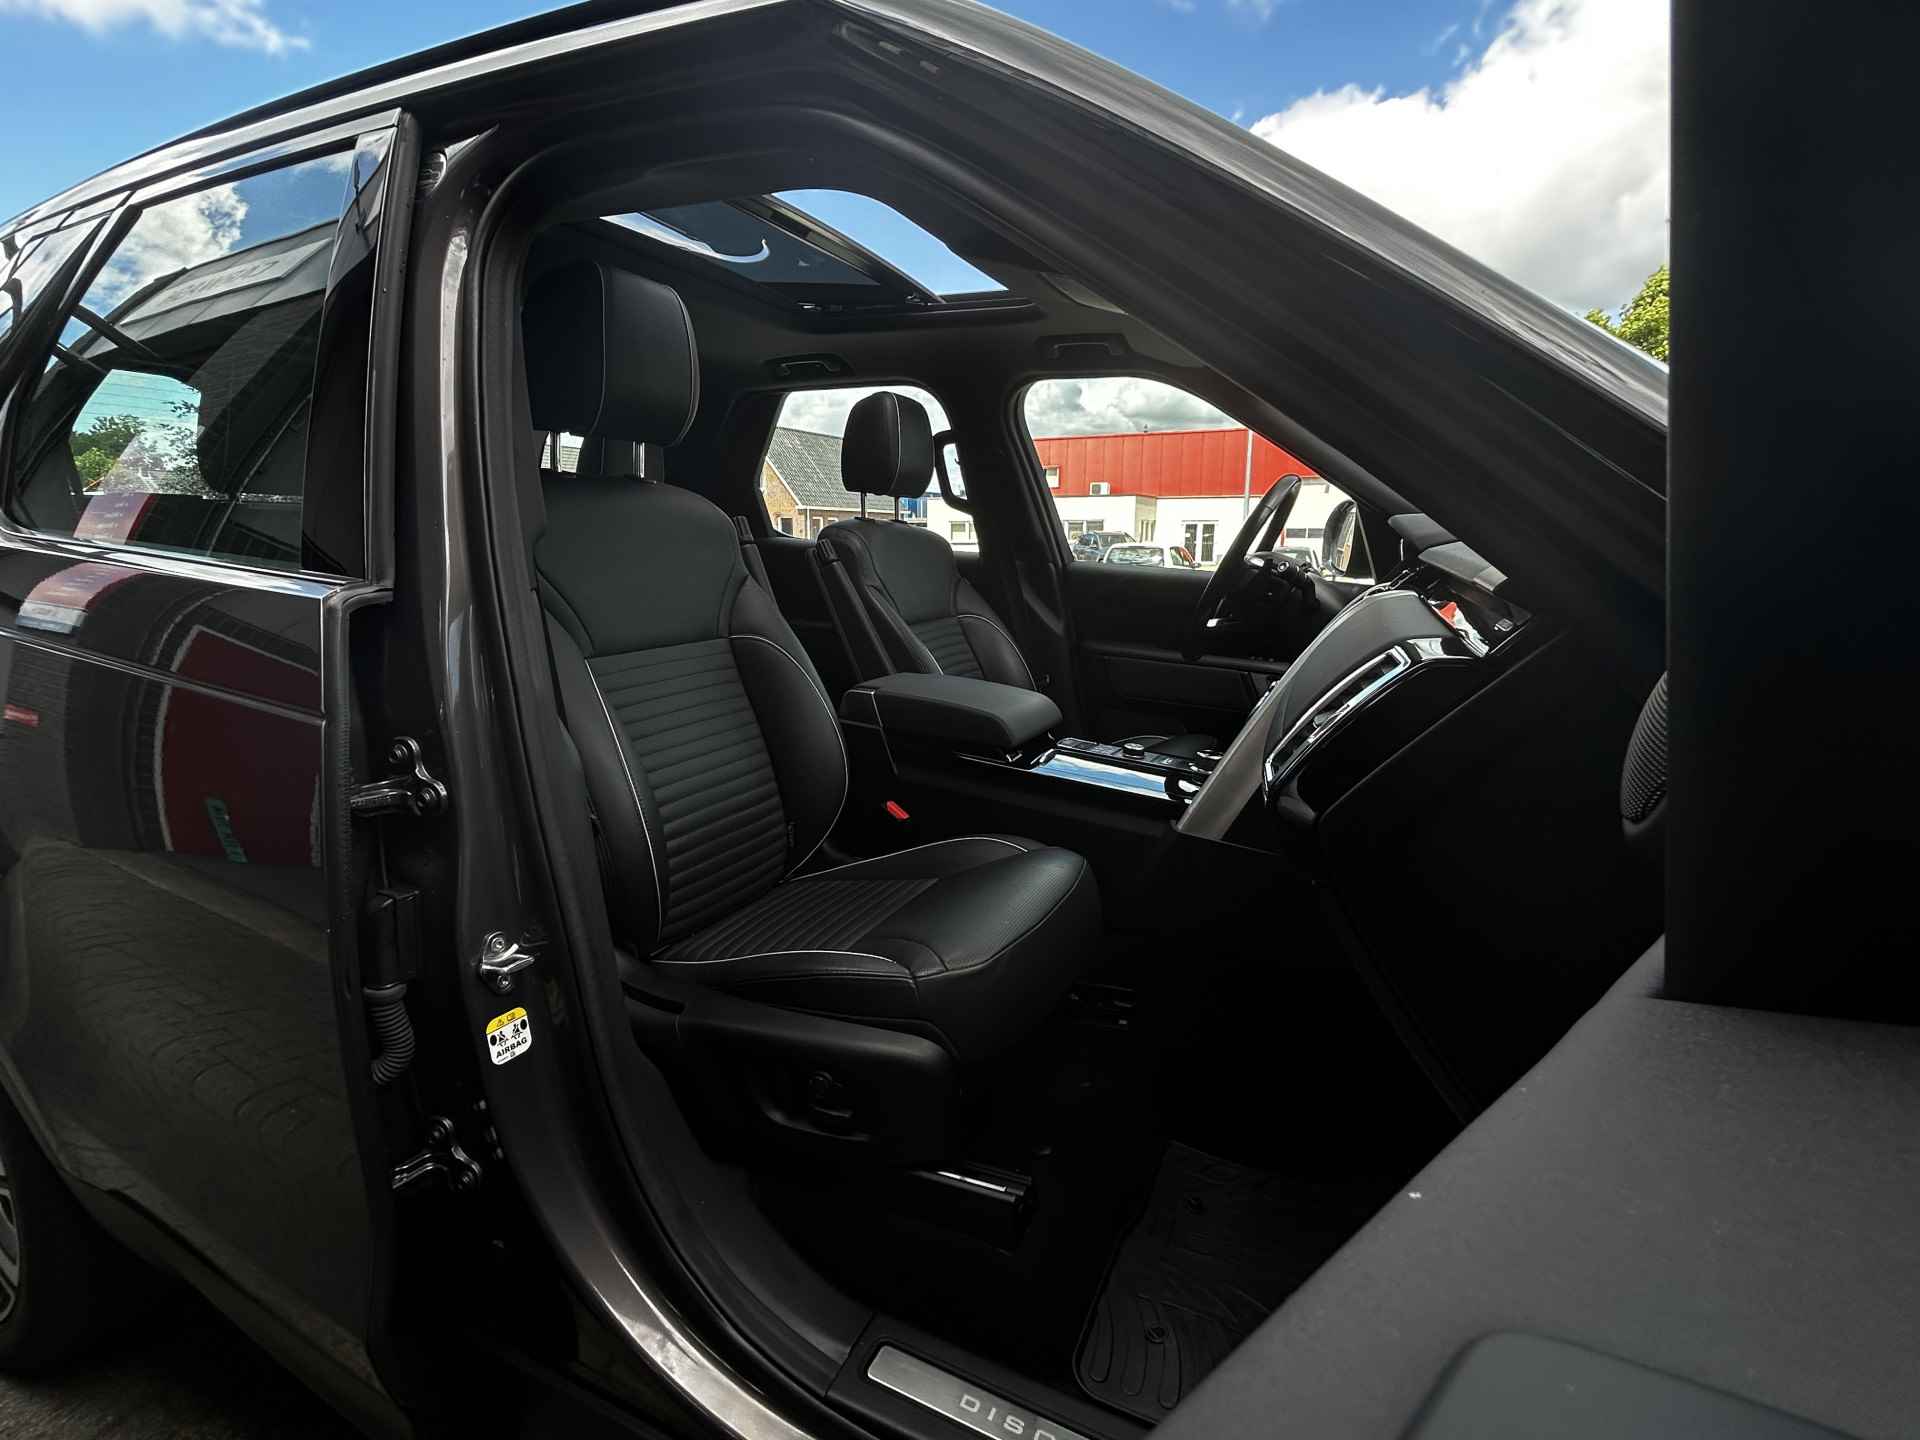 Land Rover Discovery 2.0 Sd4 HSE Luxury 7p. Navi/Clima/Leder/Panodak/7-Persoons/Luchtvering/Trekhaak - 35/48